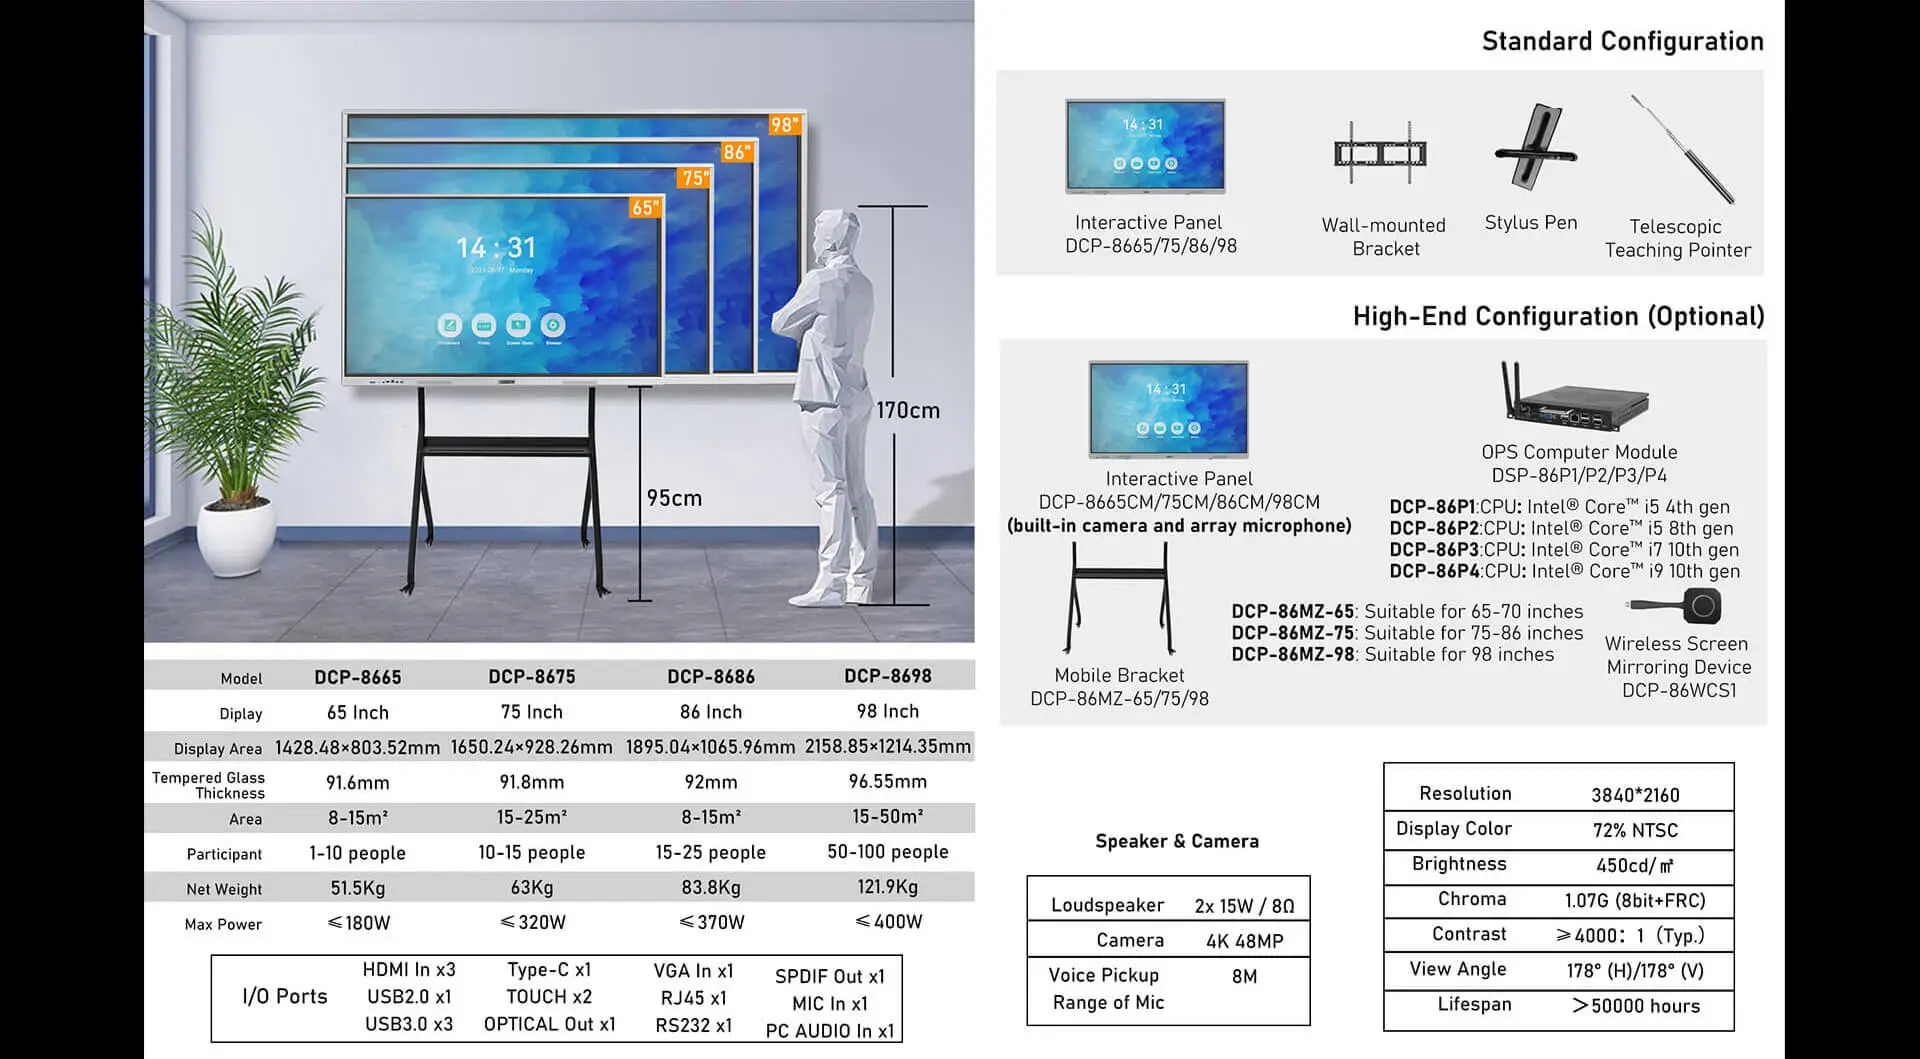 Mobile Bracket for 98 inches Interactive Panel